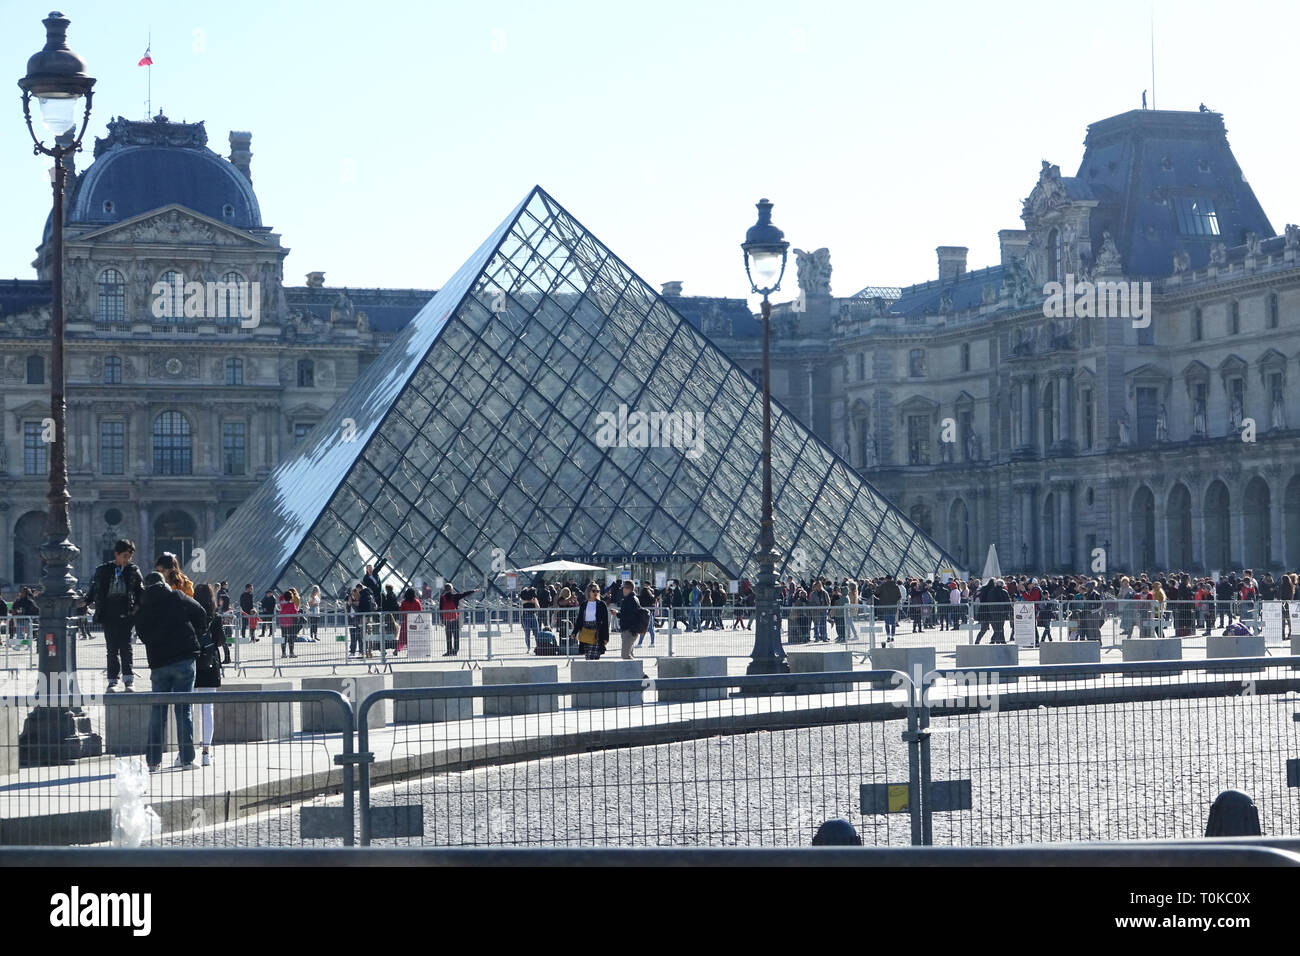 PARIS-FRANCE-FEB 25, 2019:The Louvre Pyramid is a large glass and metal pyramid designed by Chinese-American architect I.M. Pei, surrounded by three s Stock Photo